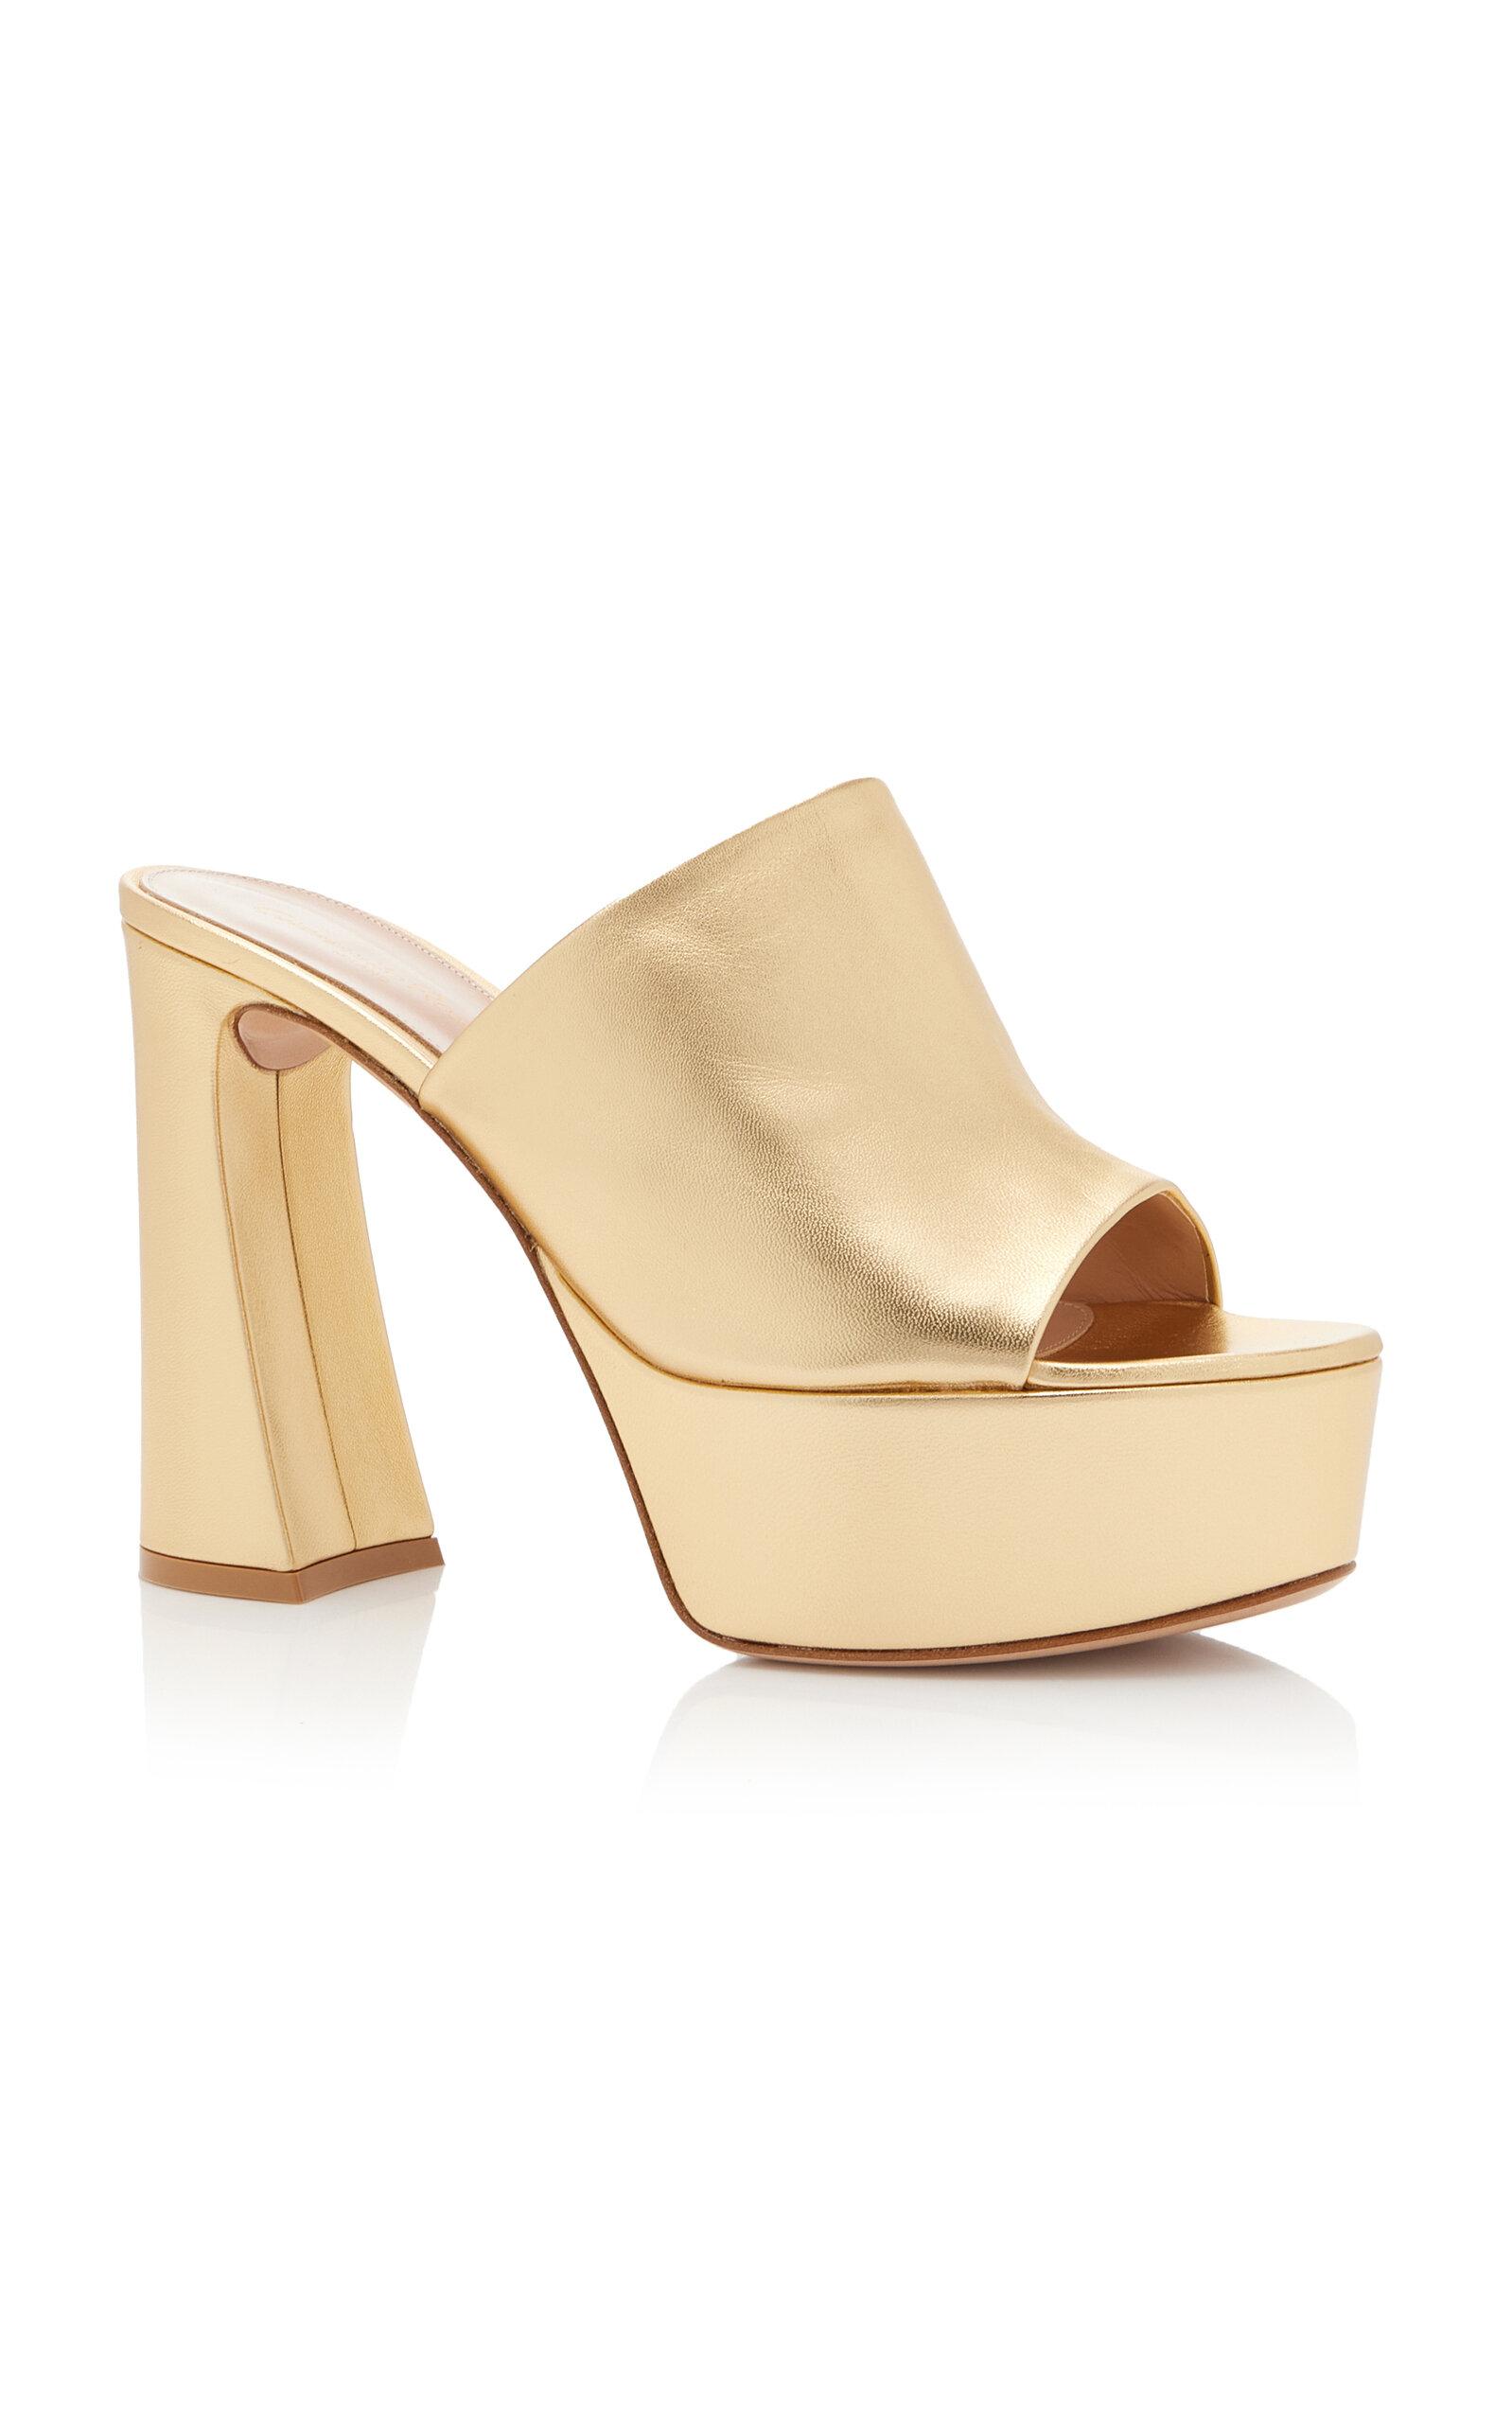 Gianvito Rossi Holly Leather Platform Mules in Natural | Lyst